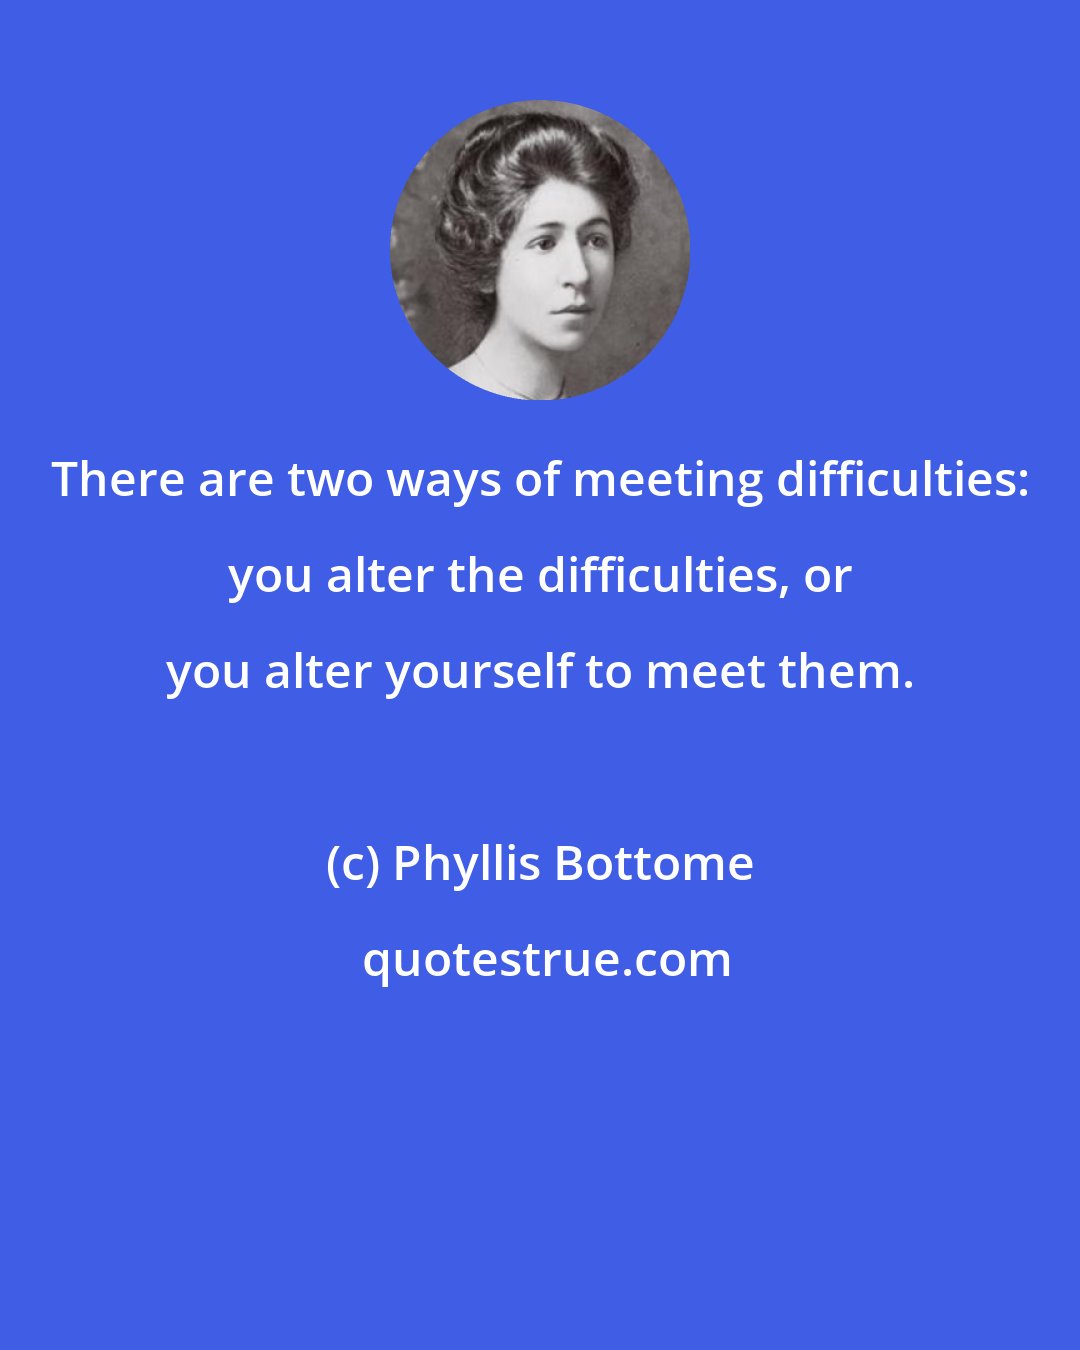 Phyllis Bottome: There are two ways of meeting difficulties: you alter the difficulties, or you alter yourself to meet them.